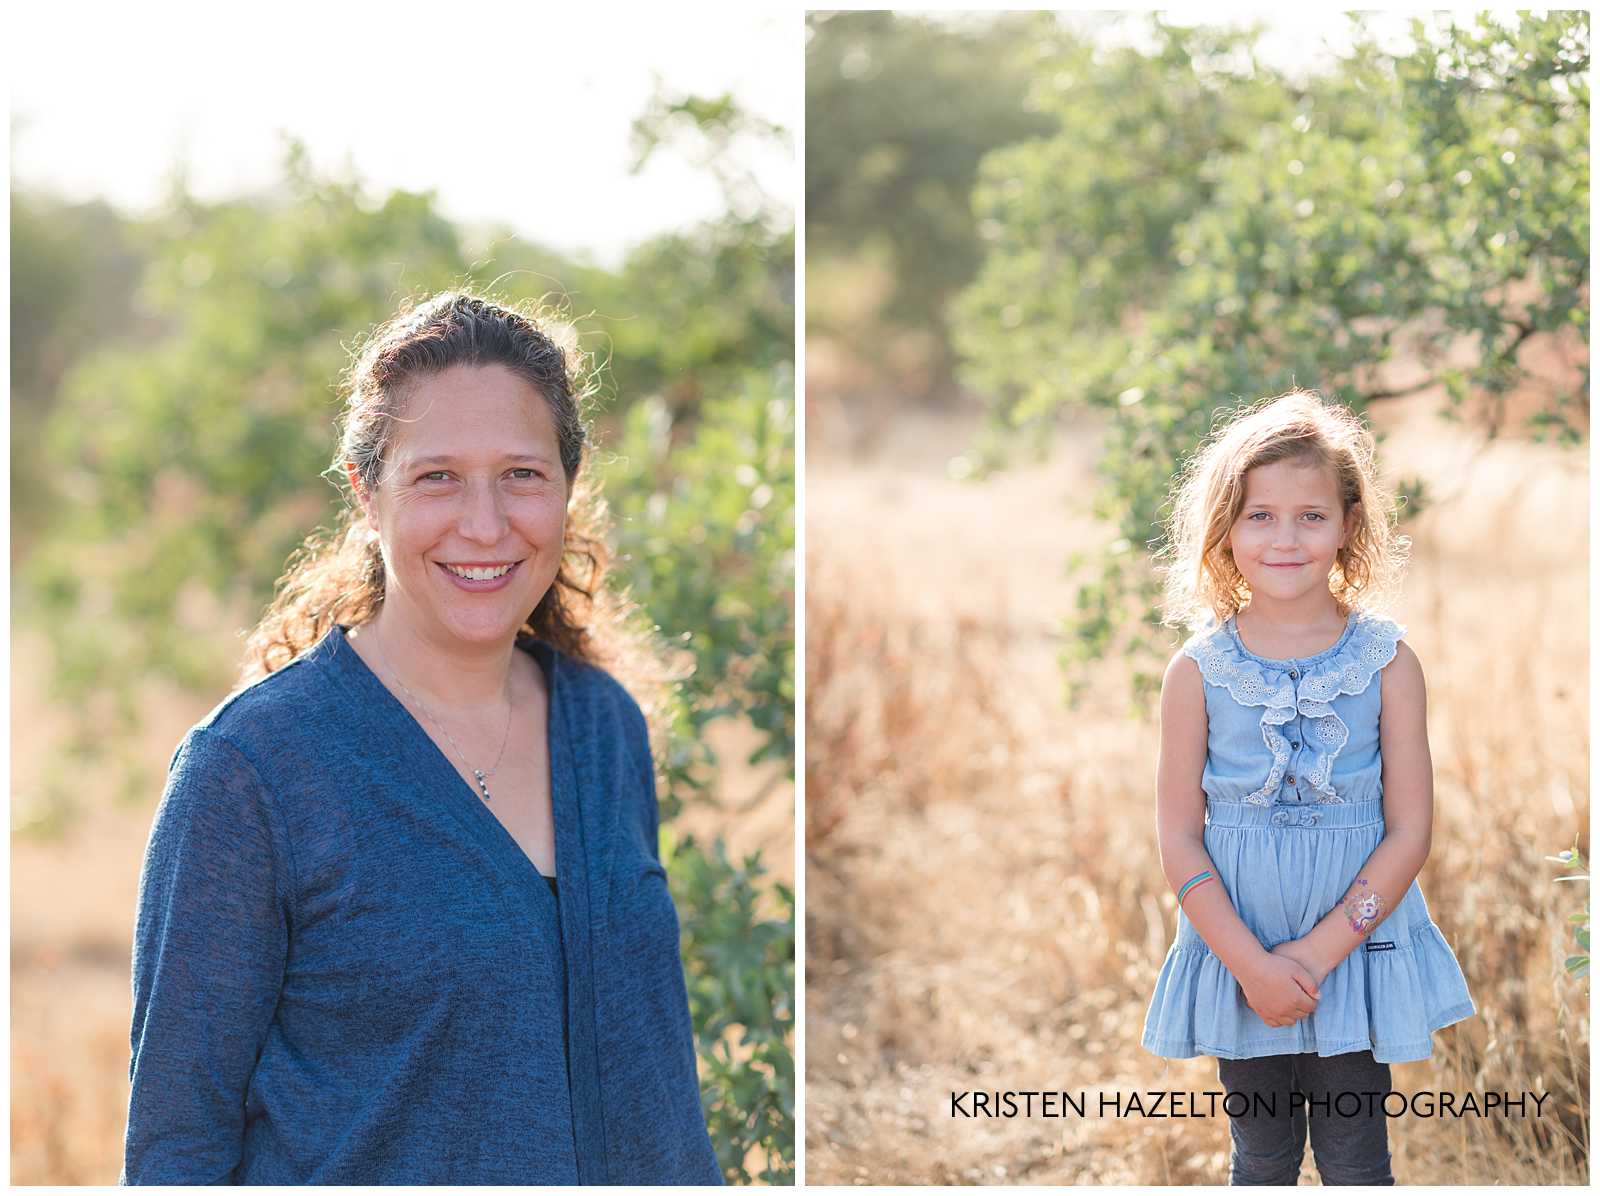 Portraits of a mom and young daughter